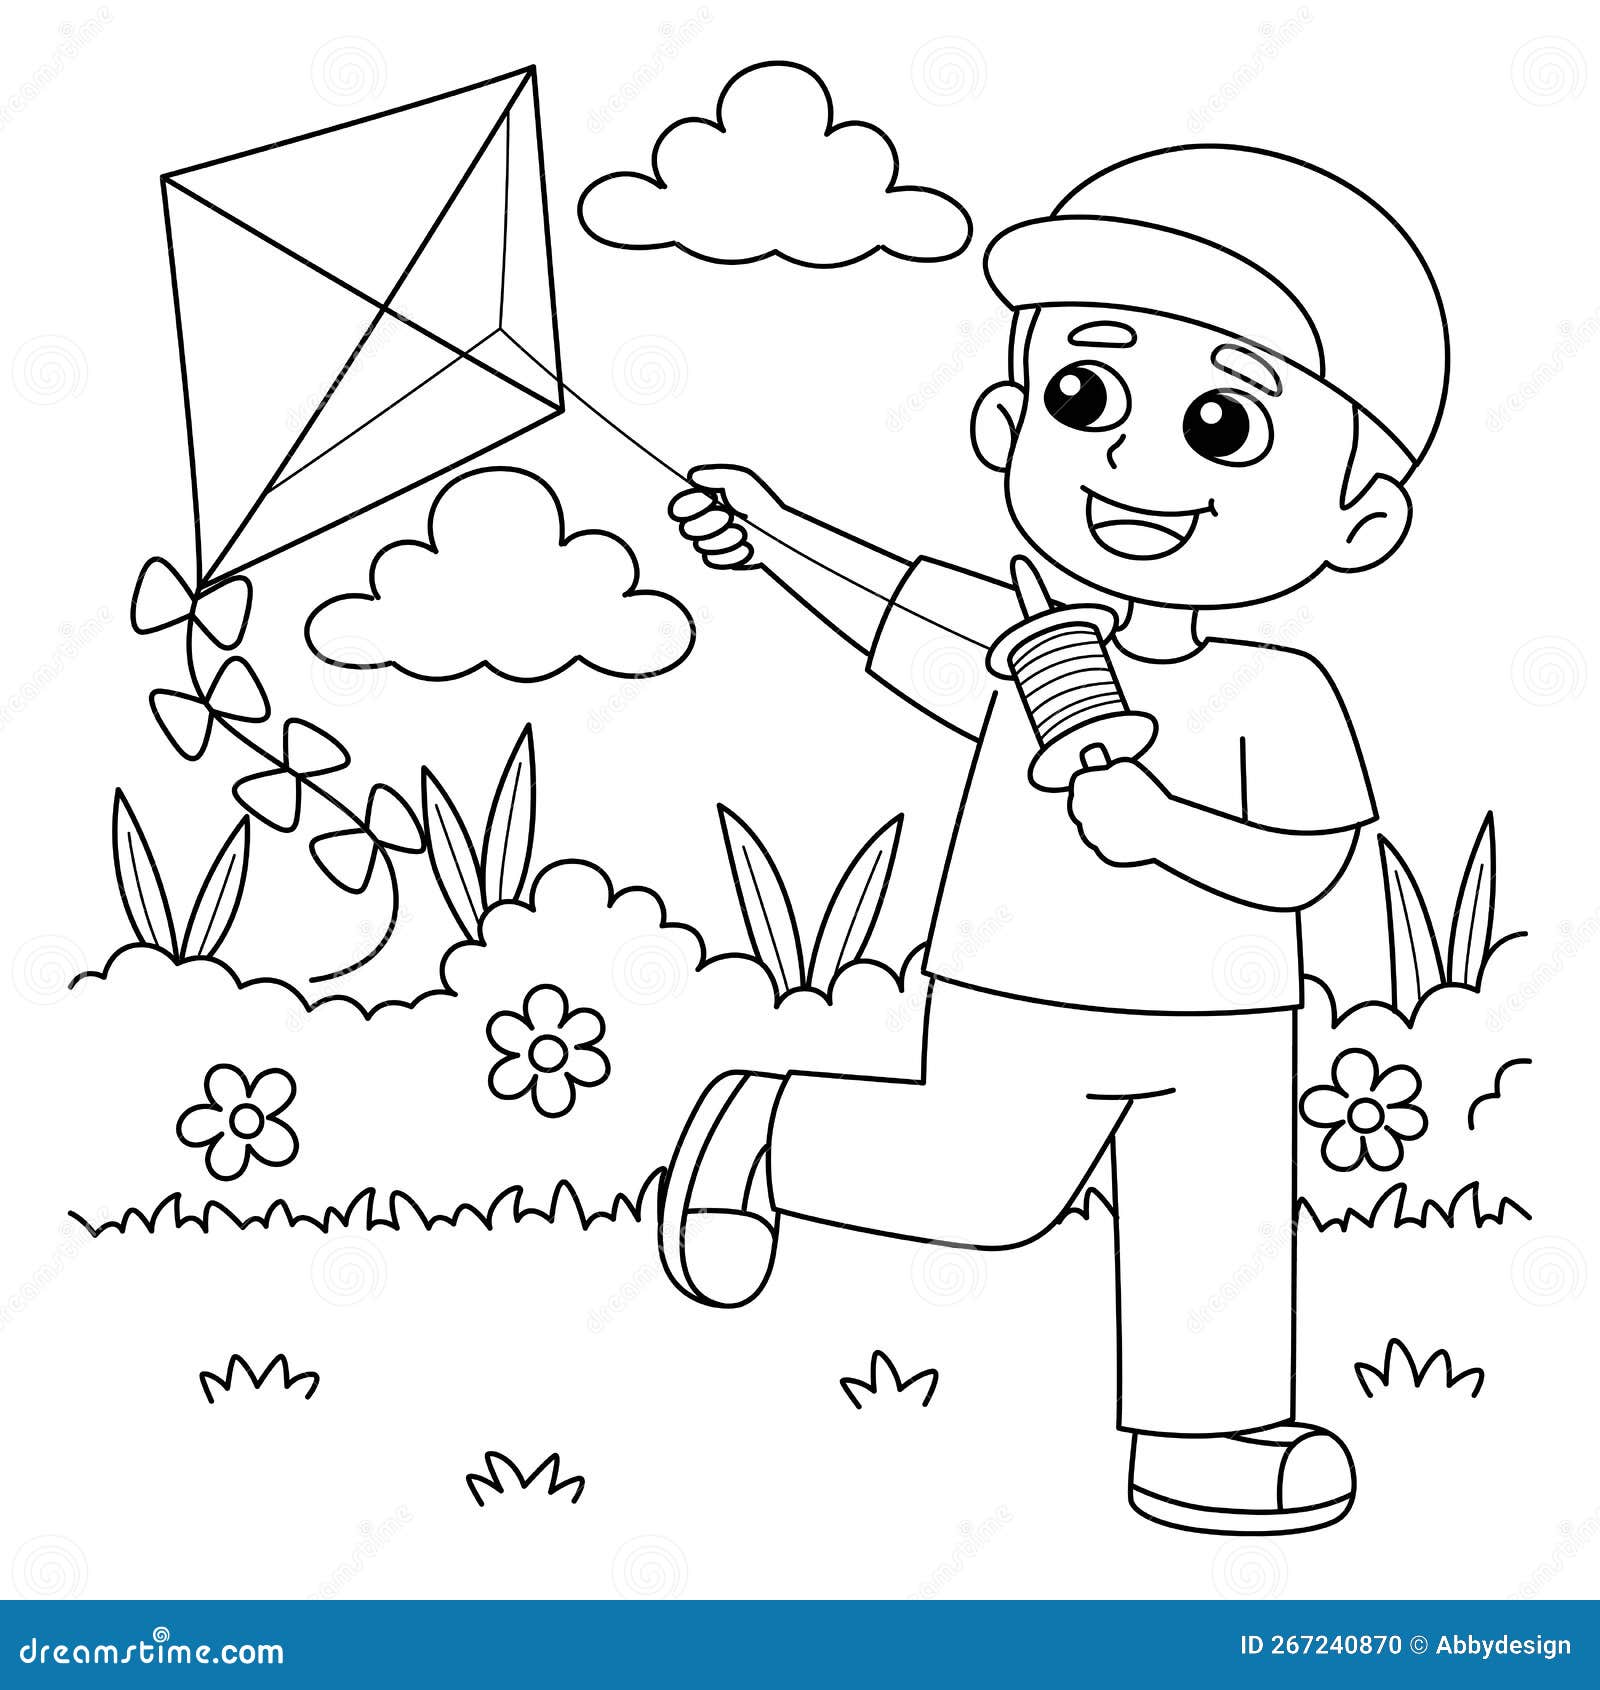 Coloring Page Outline Of Cartoon Boy Running With A Kite With Dog Coloring  Book For Kids Stock Illustration - Download Image Now - iStock